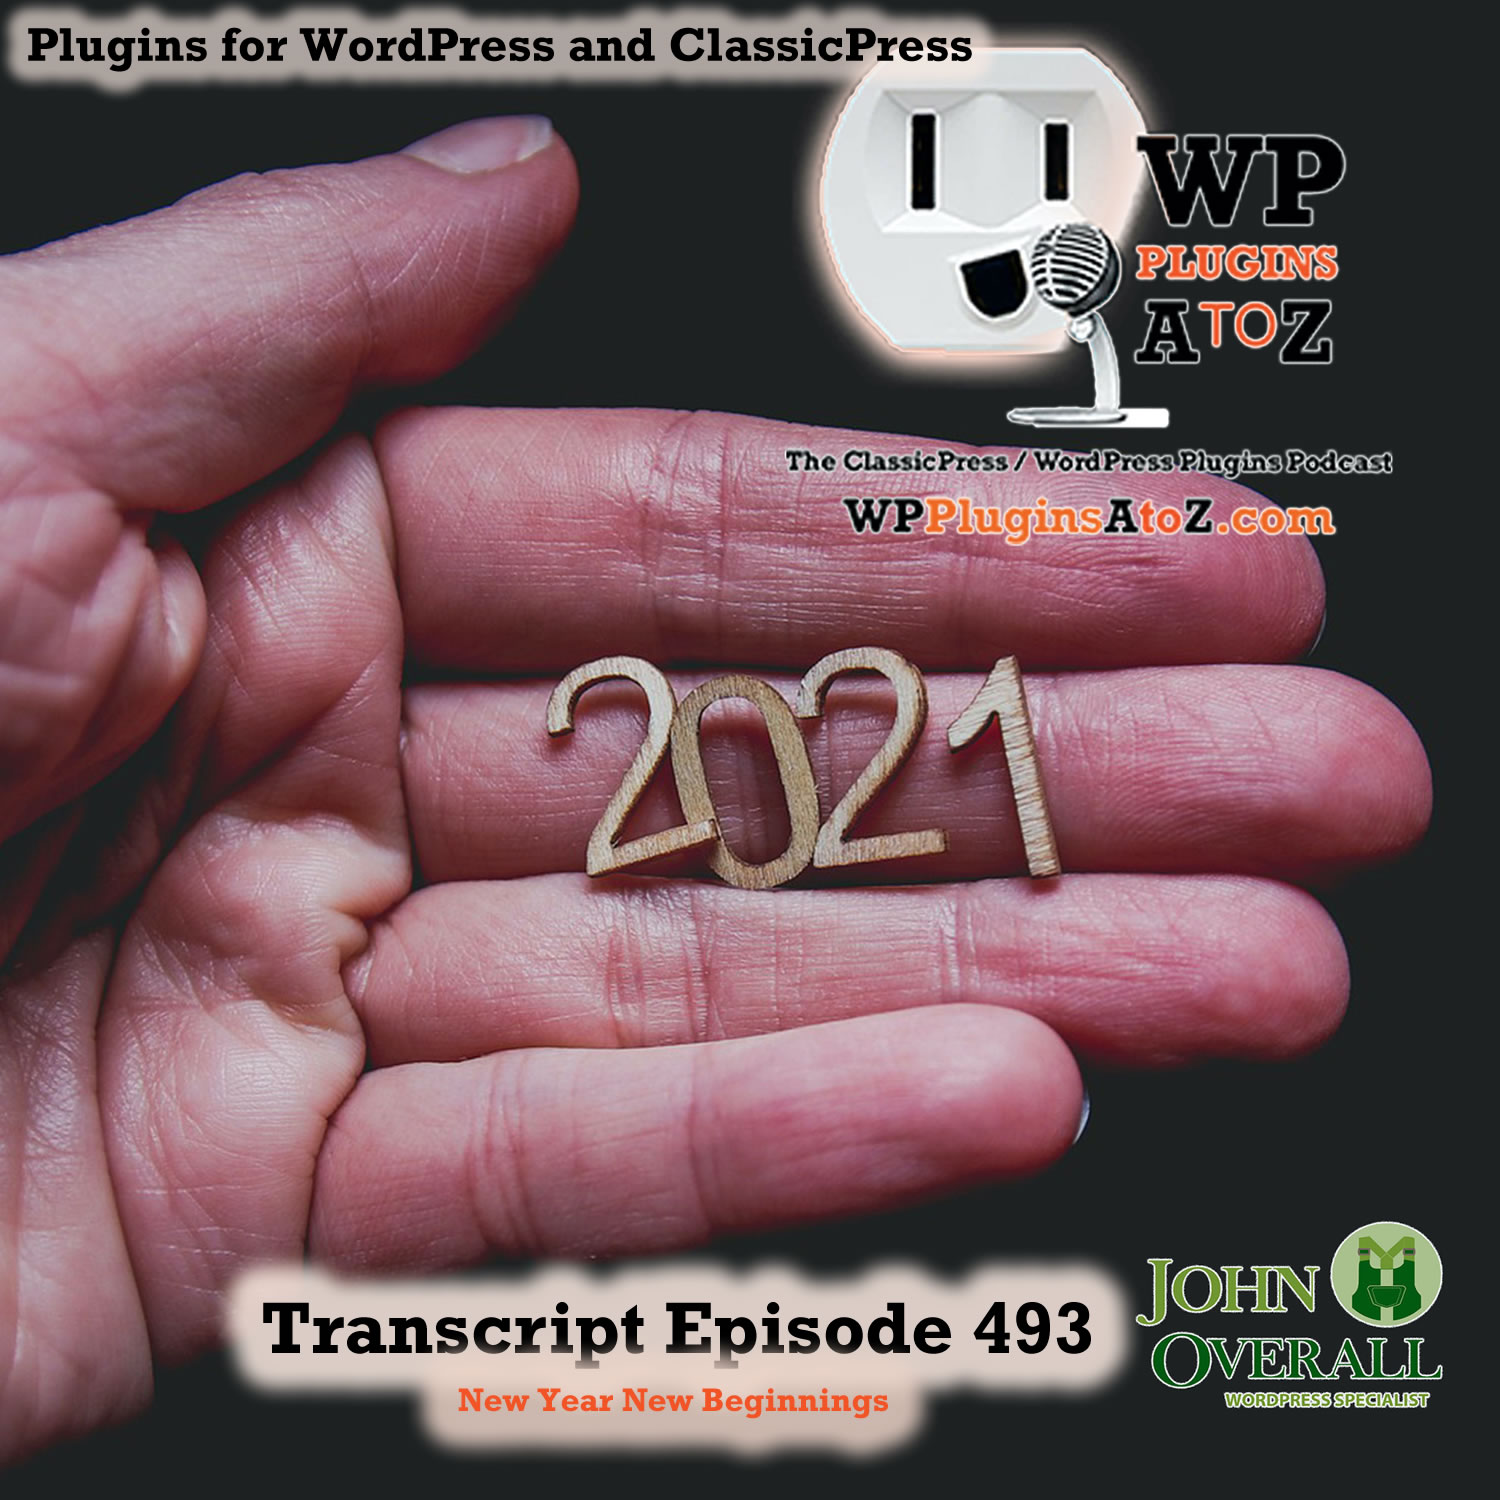 It's Episode 493 Replacements, Hiding, Testimonials, Blacklists, Hiding, Sebastian..., and ClassicPress Options. It's all coming up on WordPress Plugins A-Z!